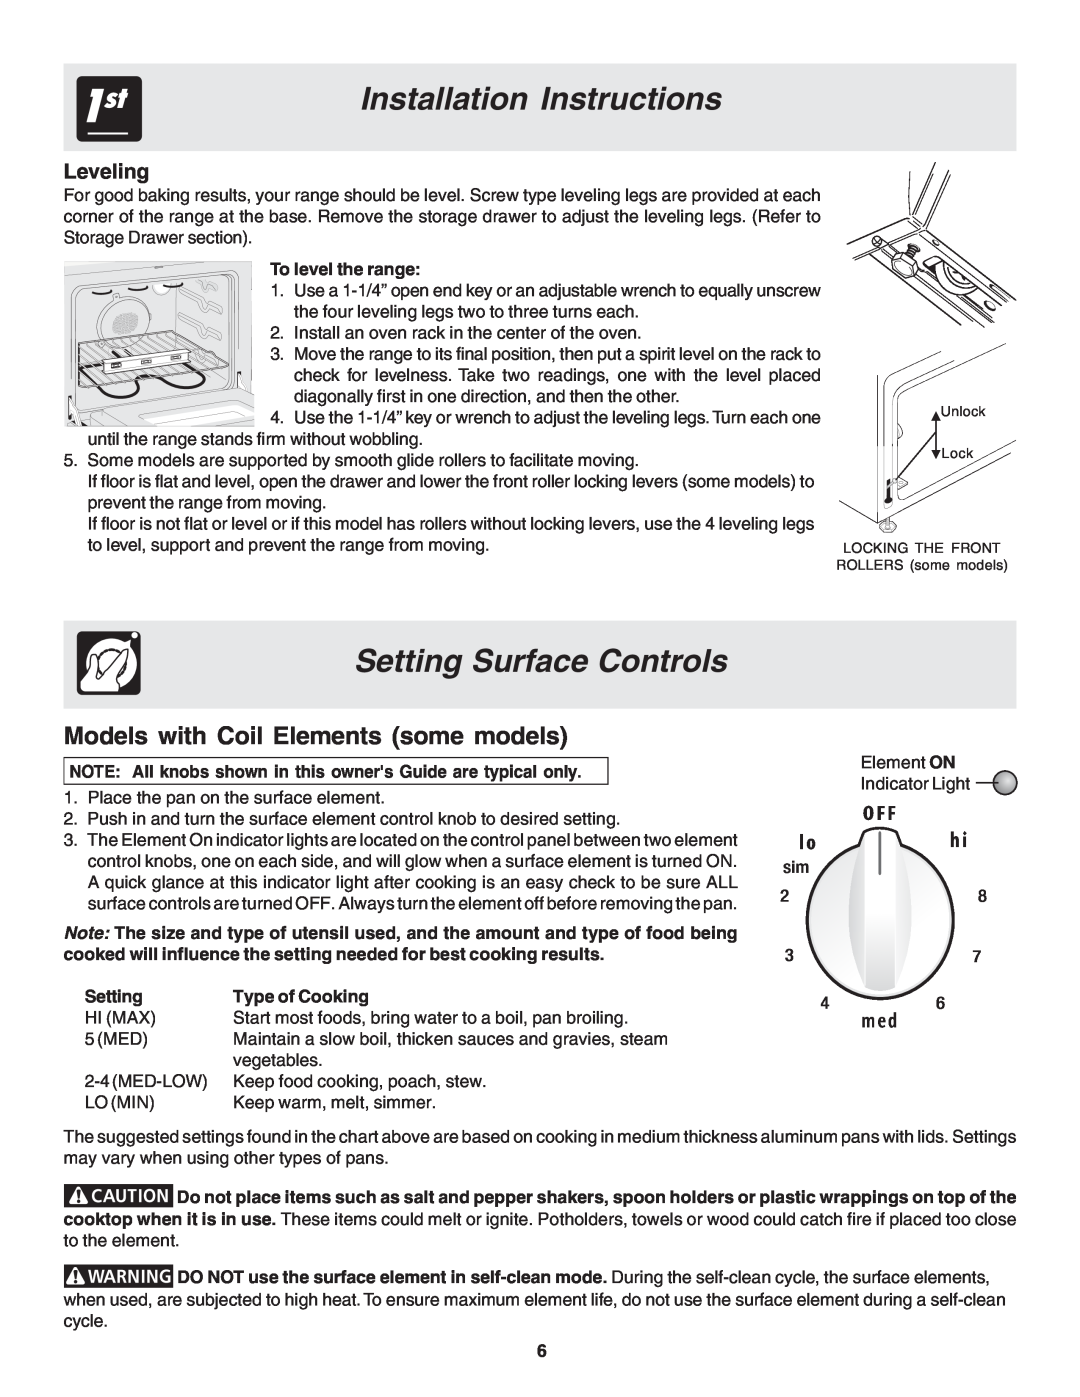 Frigidaire 318200439 Setting Surface Controls, Installation Instructions, Leveling, To level the range, Type of Cooking 